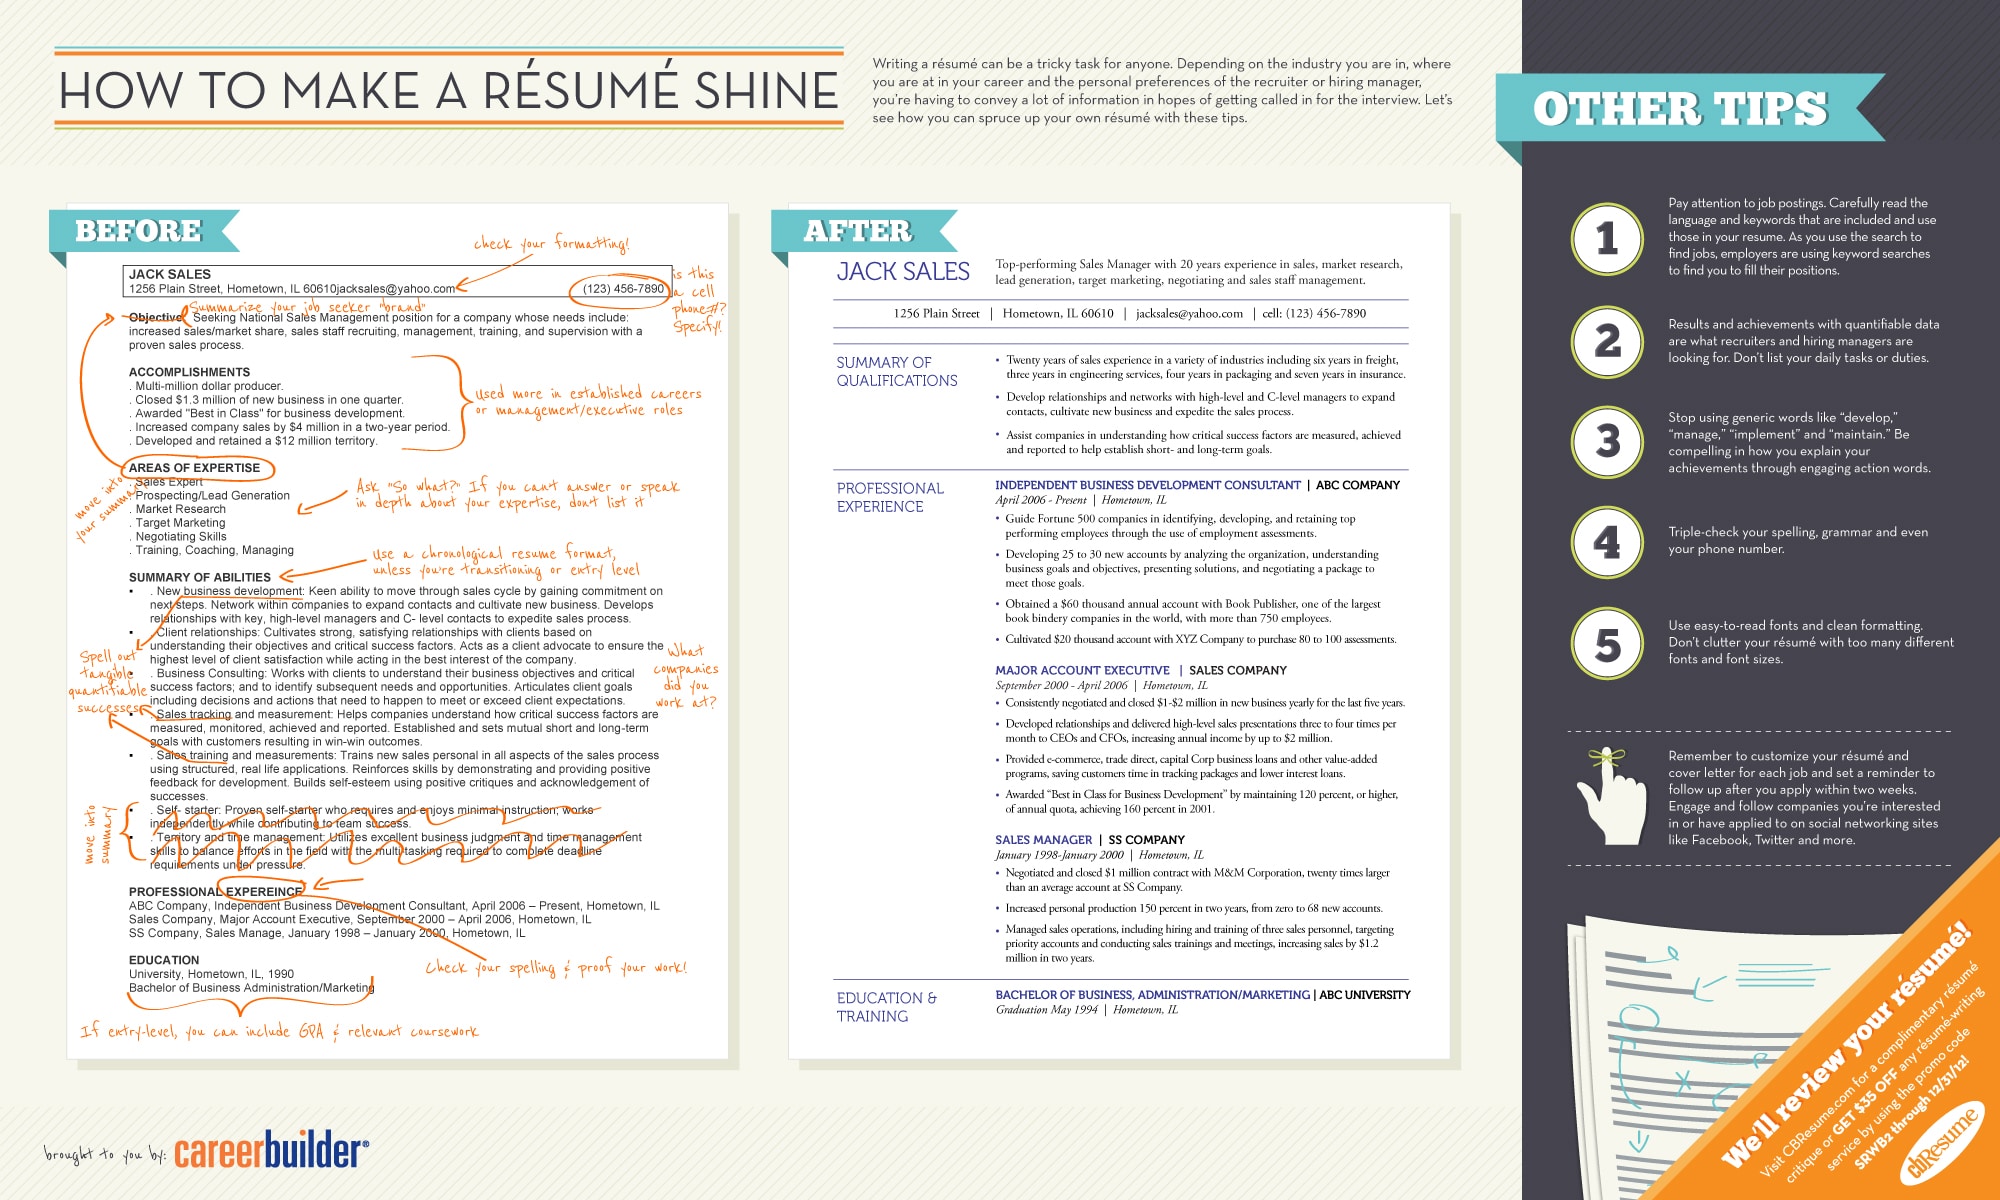 Resume Tips To Help You Land That Job [Infographic]